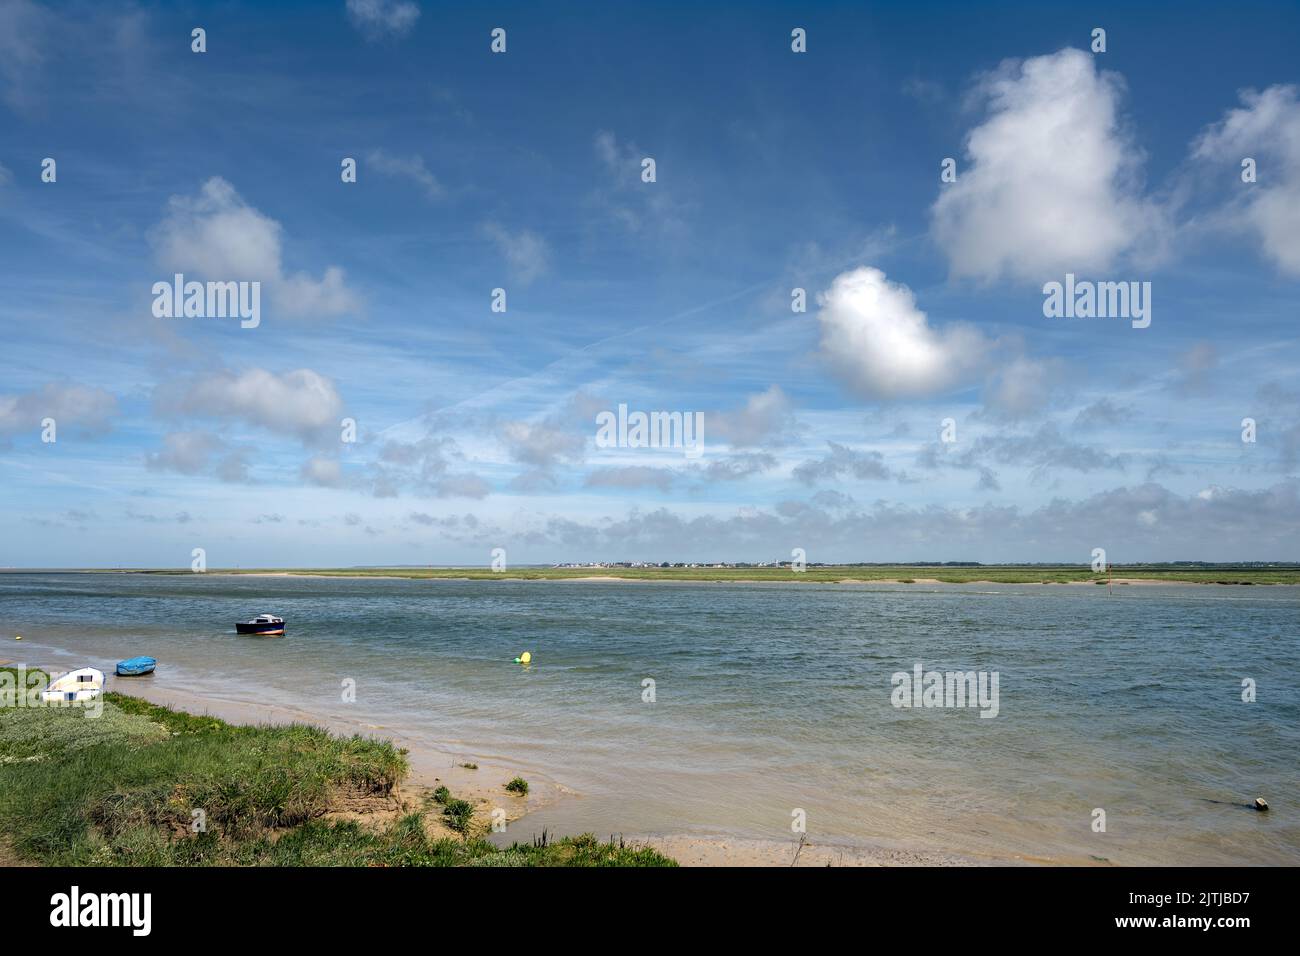 View of the Somme Bay near Saint-Valéry-sur-Somme, Hauts-de-France, France Stock Photo